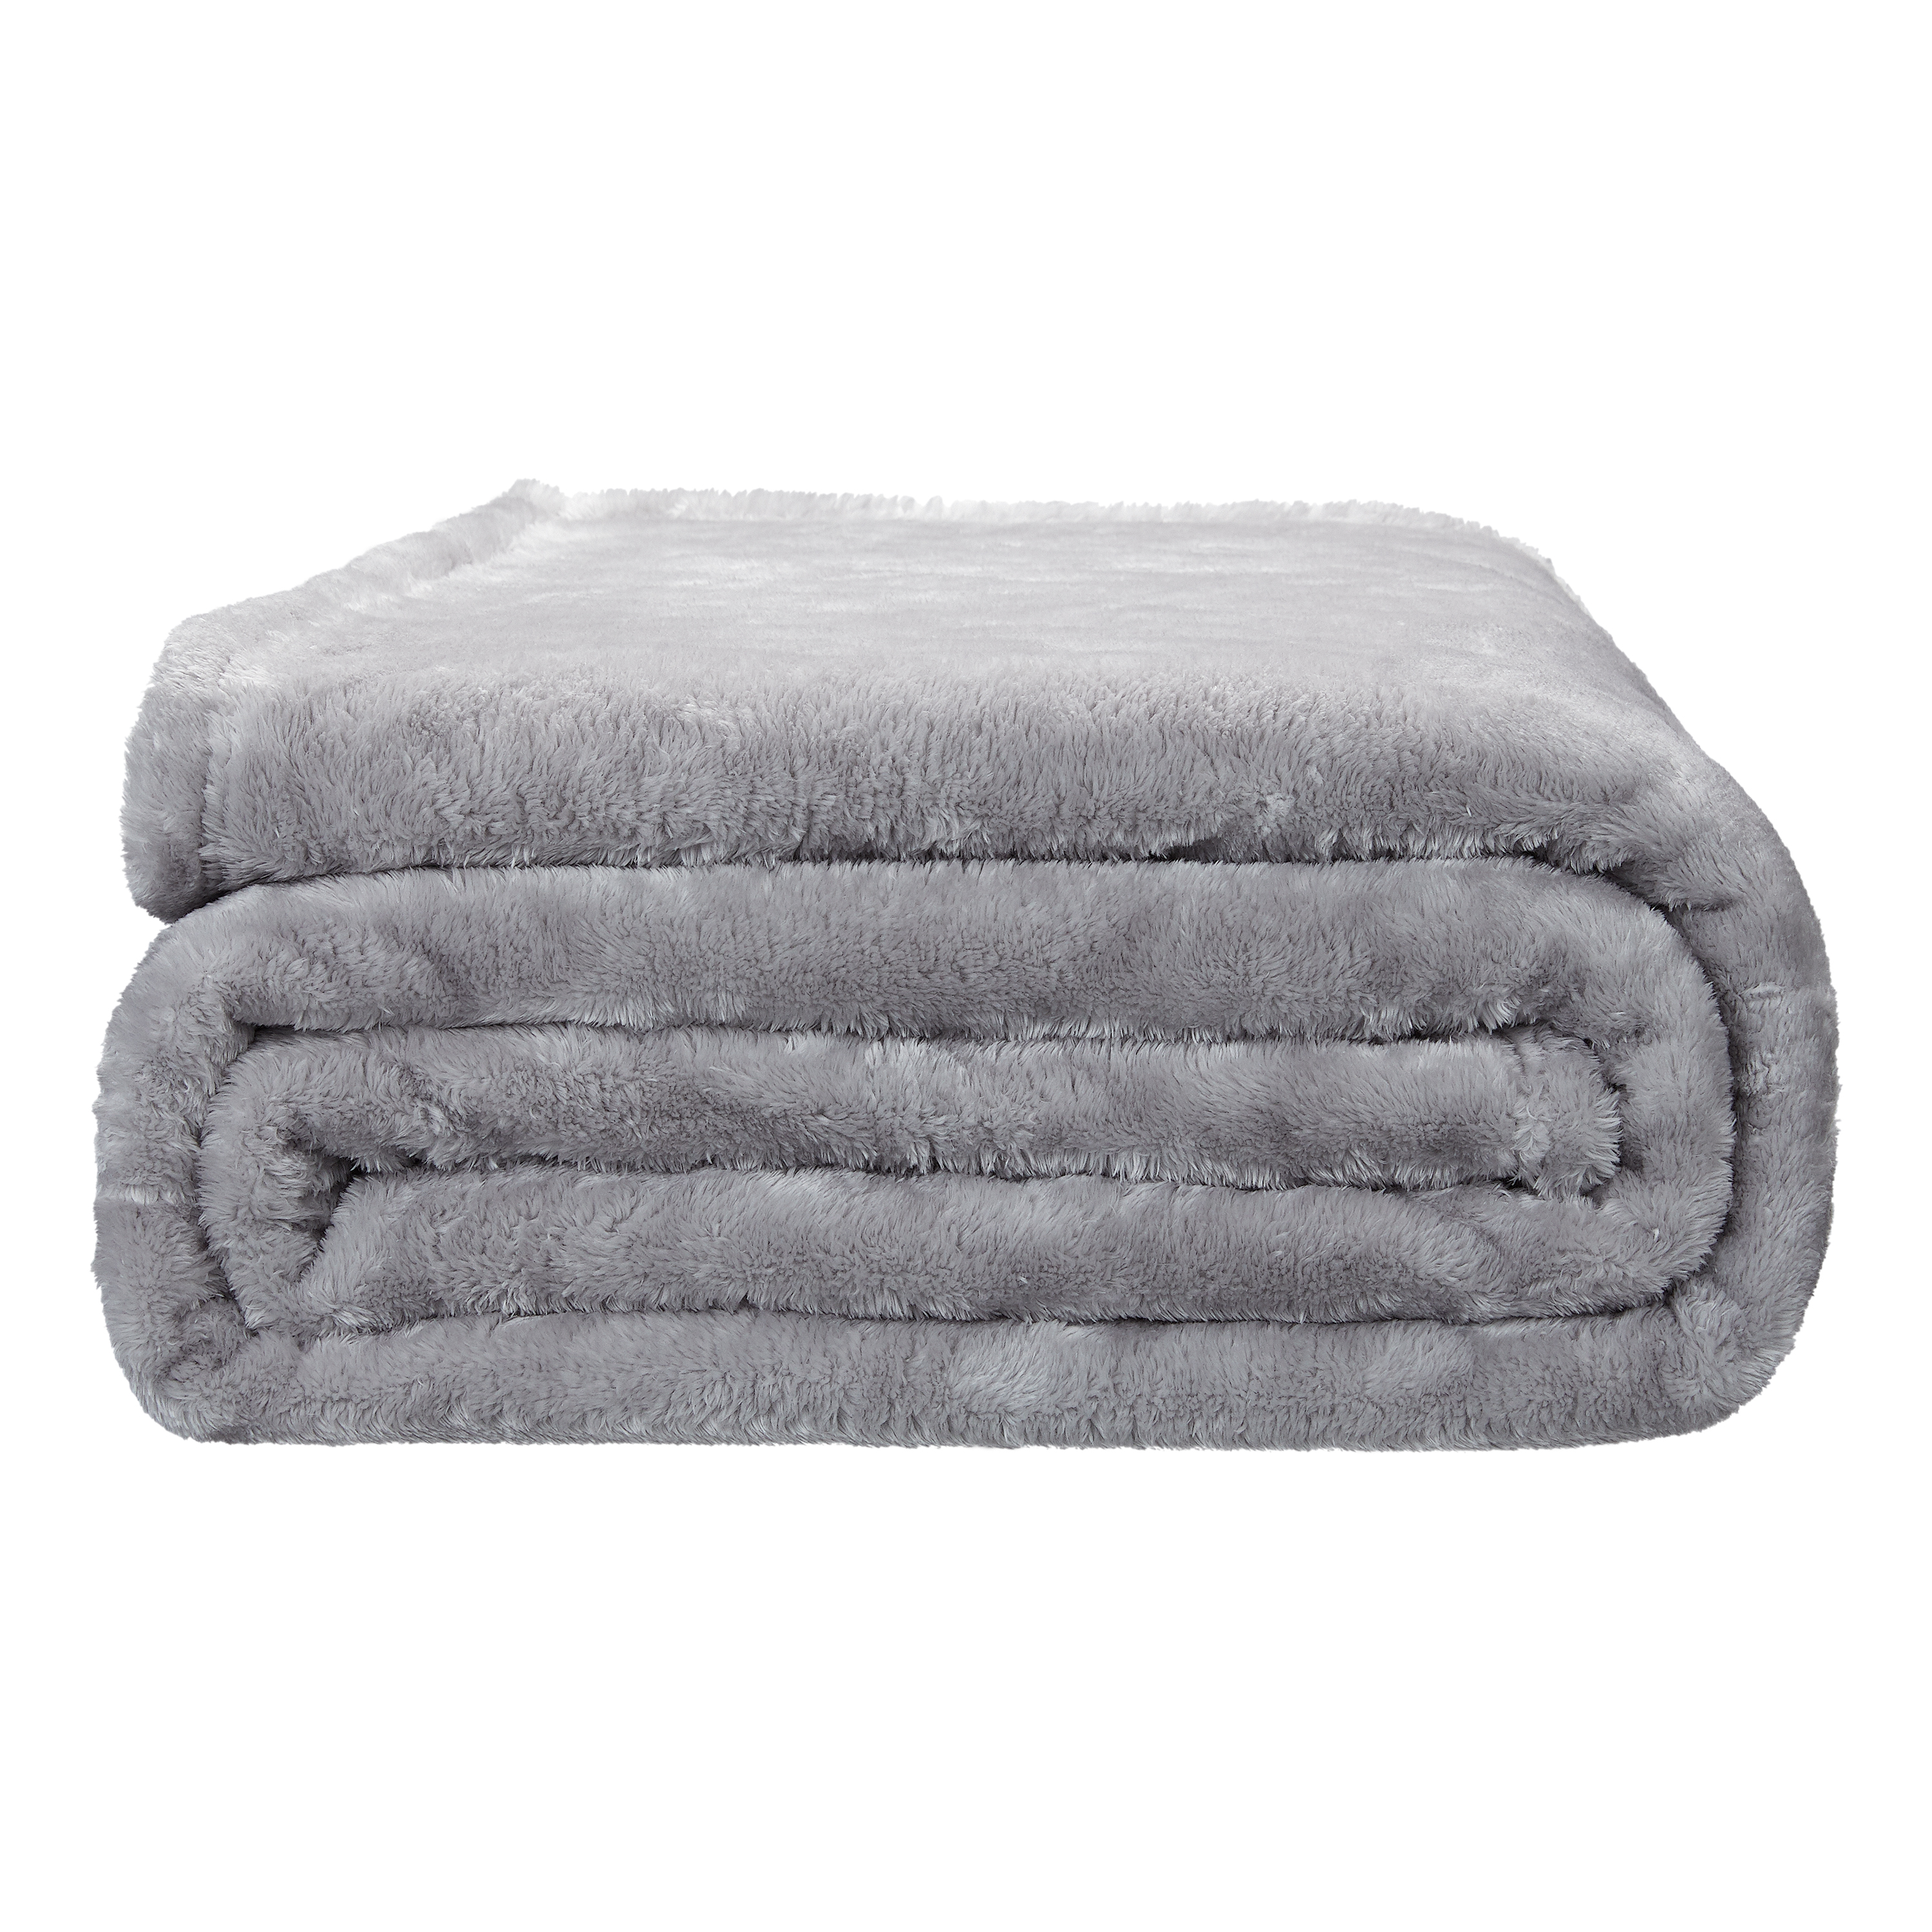 Better Homes & Gardens Luxe Plush Blanket, Full/Queen Soft Silver - image 4 of 4